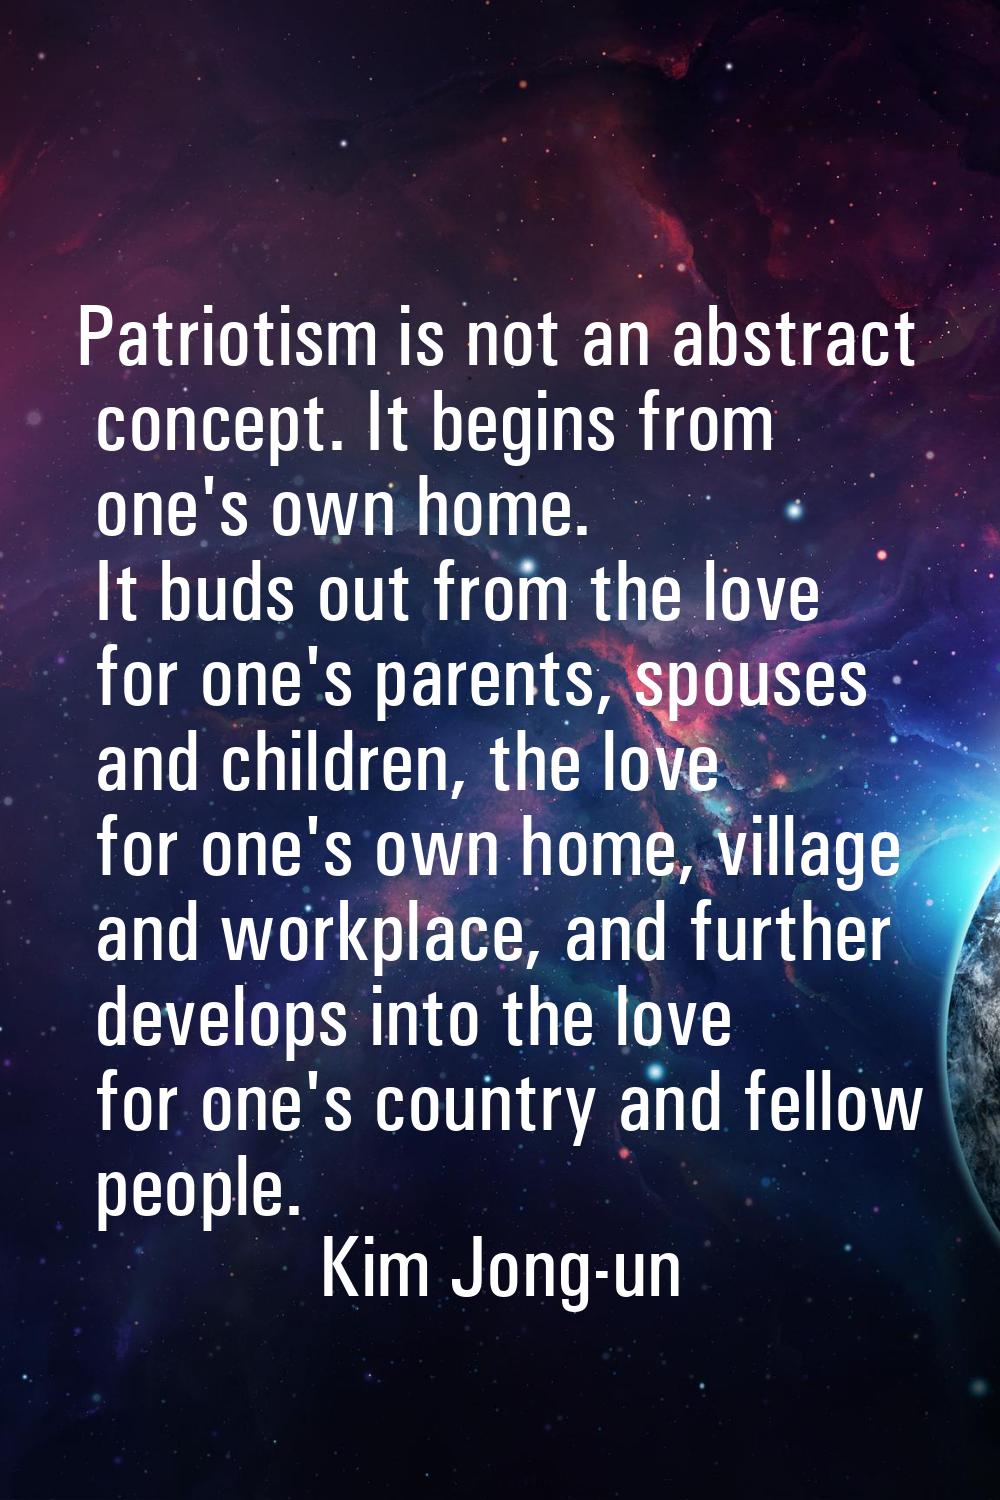 Patriotism is not an abstract concept. It begins from one's own home. It buds out from the love for